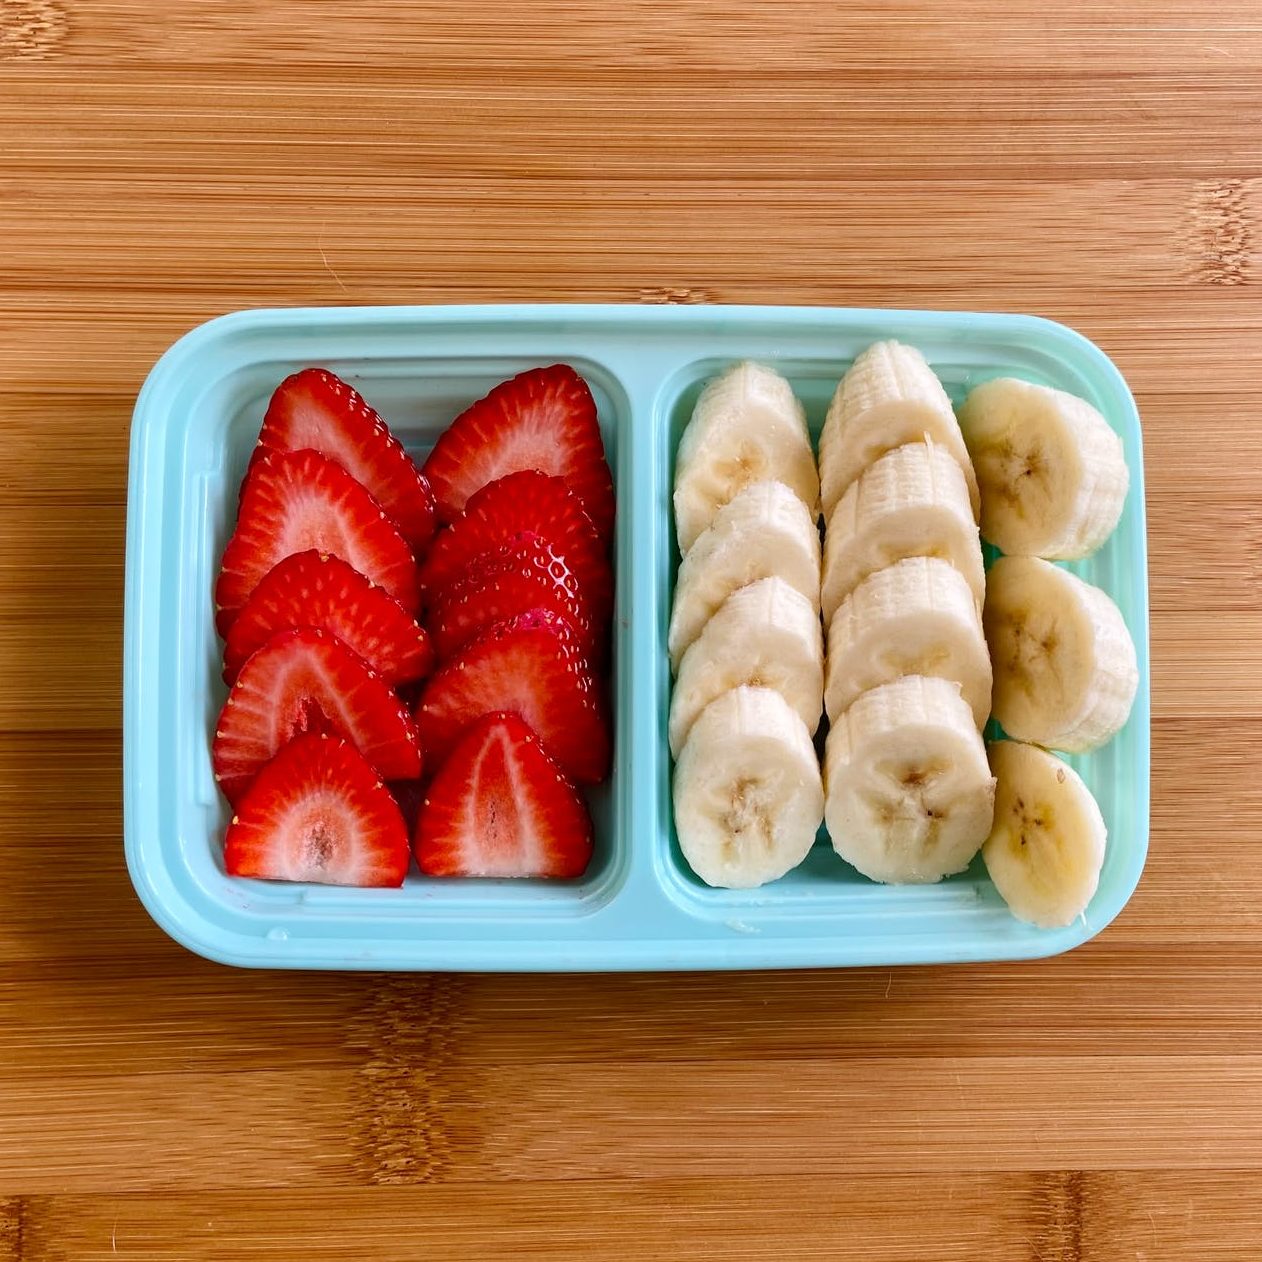 sliced strawberries and bananas on a plastic container